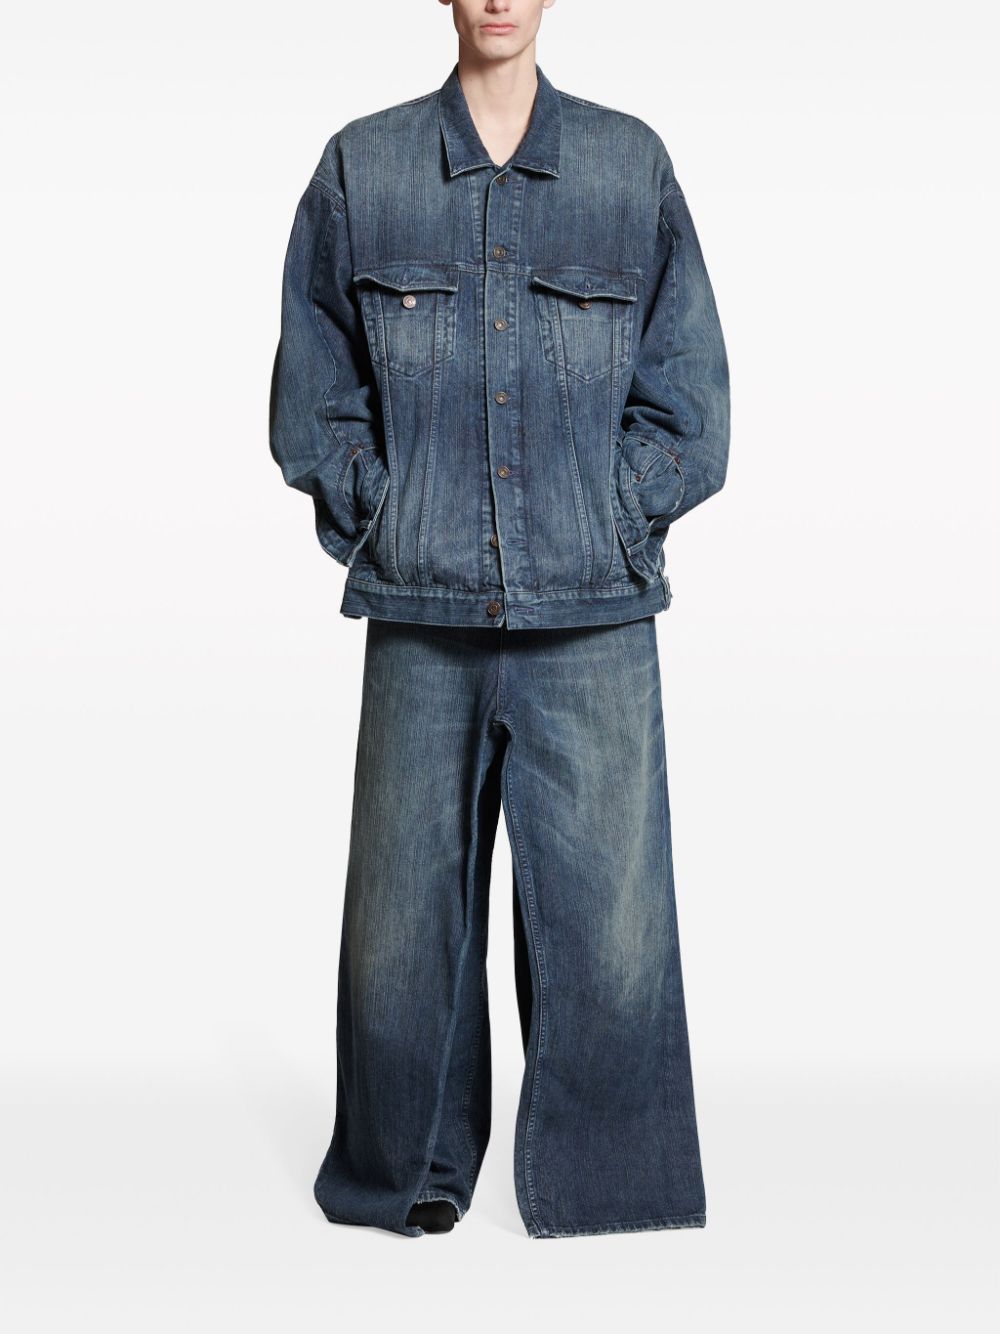 Blue Denim Oversized Jacket with Classic Button Placket and Front Pockets